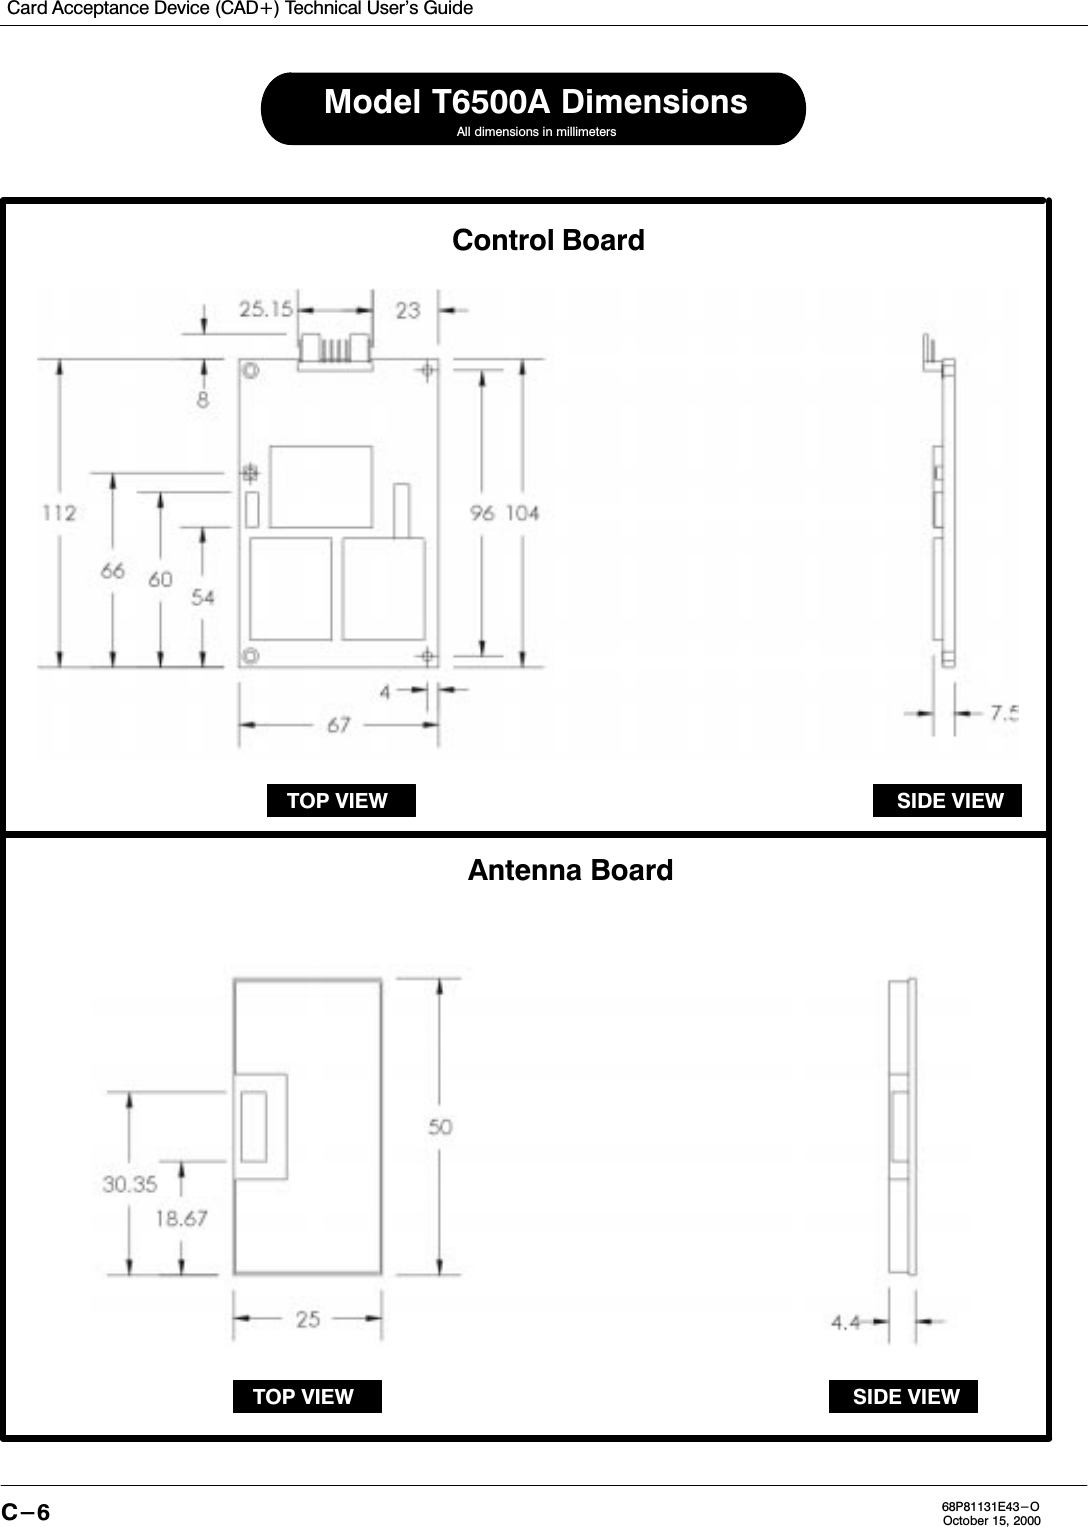 Card Acceptance Device (CAD+) Technical User&apos;s GuideC-6 68P81131E43-OOctober 15, 2000Control BoardAntenna BoardAll dimensions in millimetersModel T6500A DimensionsSIDE VIEWTOP VIEWTOP VIEW SIDE VIEW